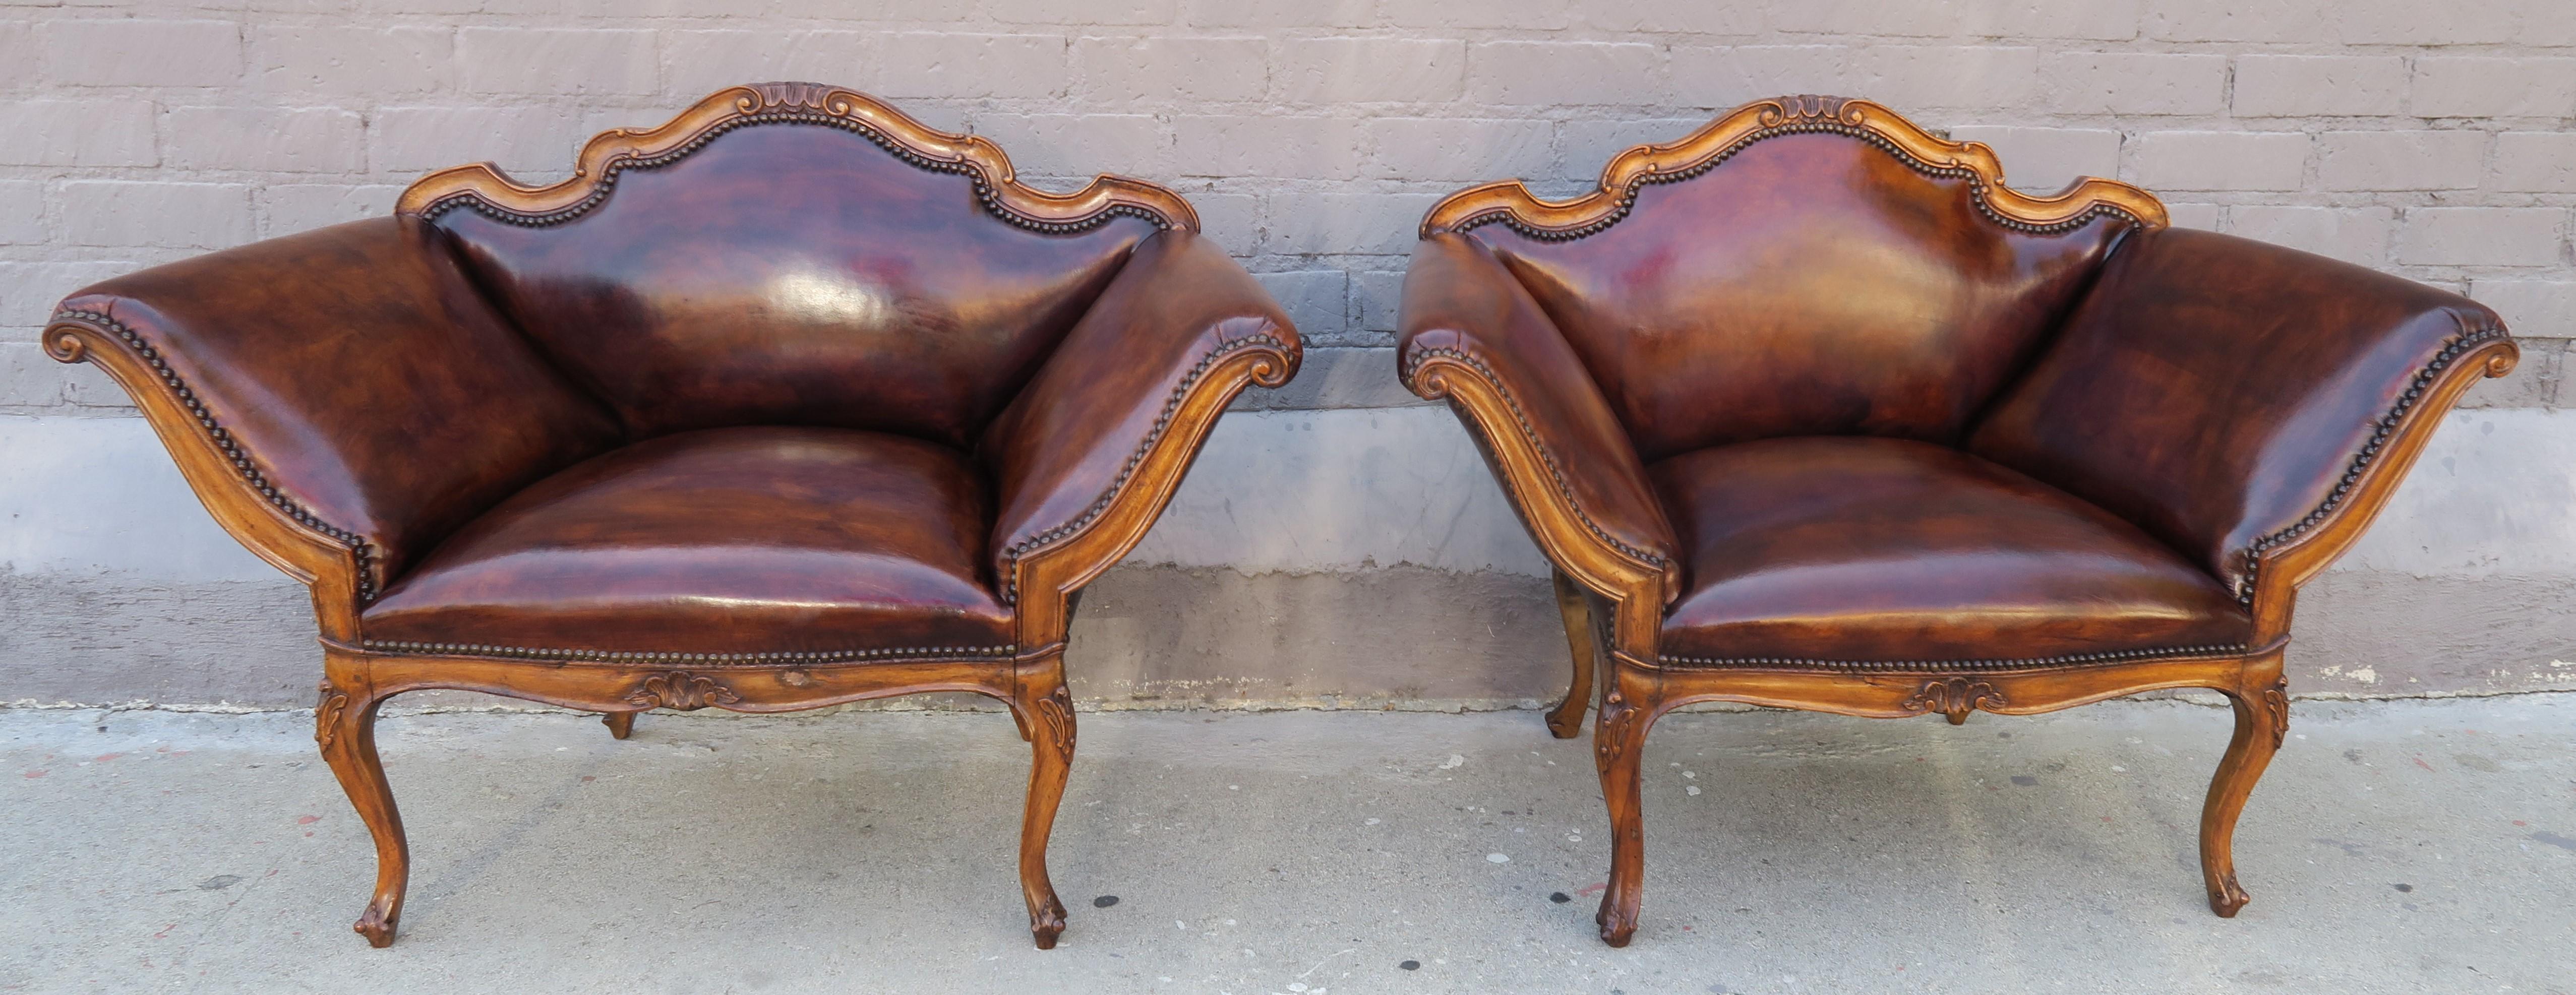 Pair of French carved walnut leather upholstered armchairs with antique brass colored nailhead trim detail. The chairs stand on four cabriole legs. This unique pair of leather armchairs have beautiful lines and would be a great addition to any